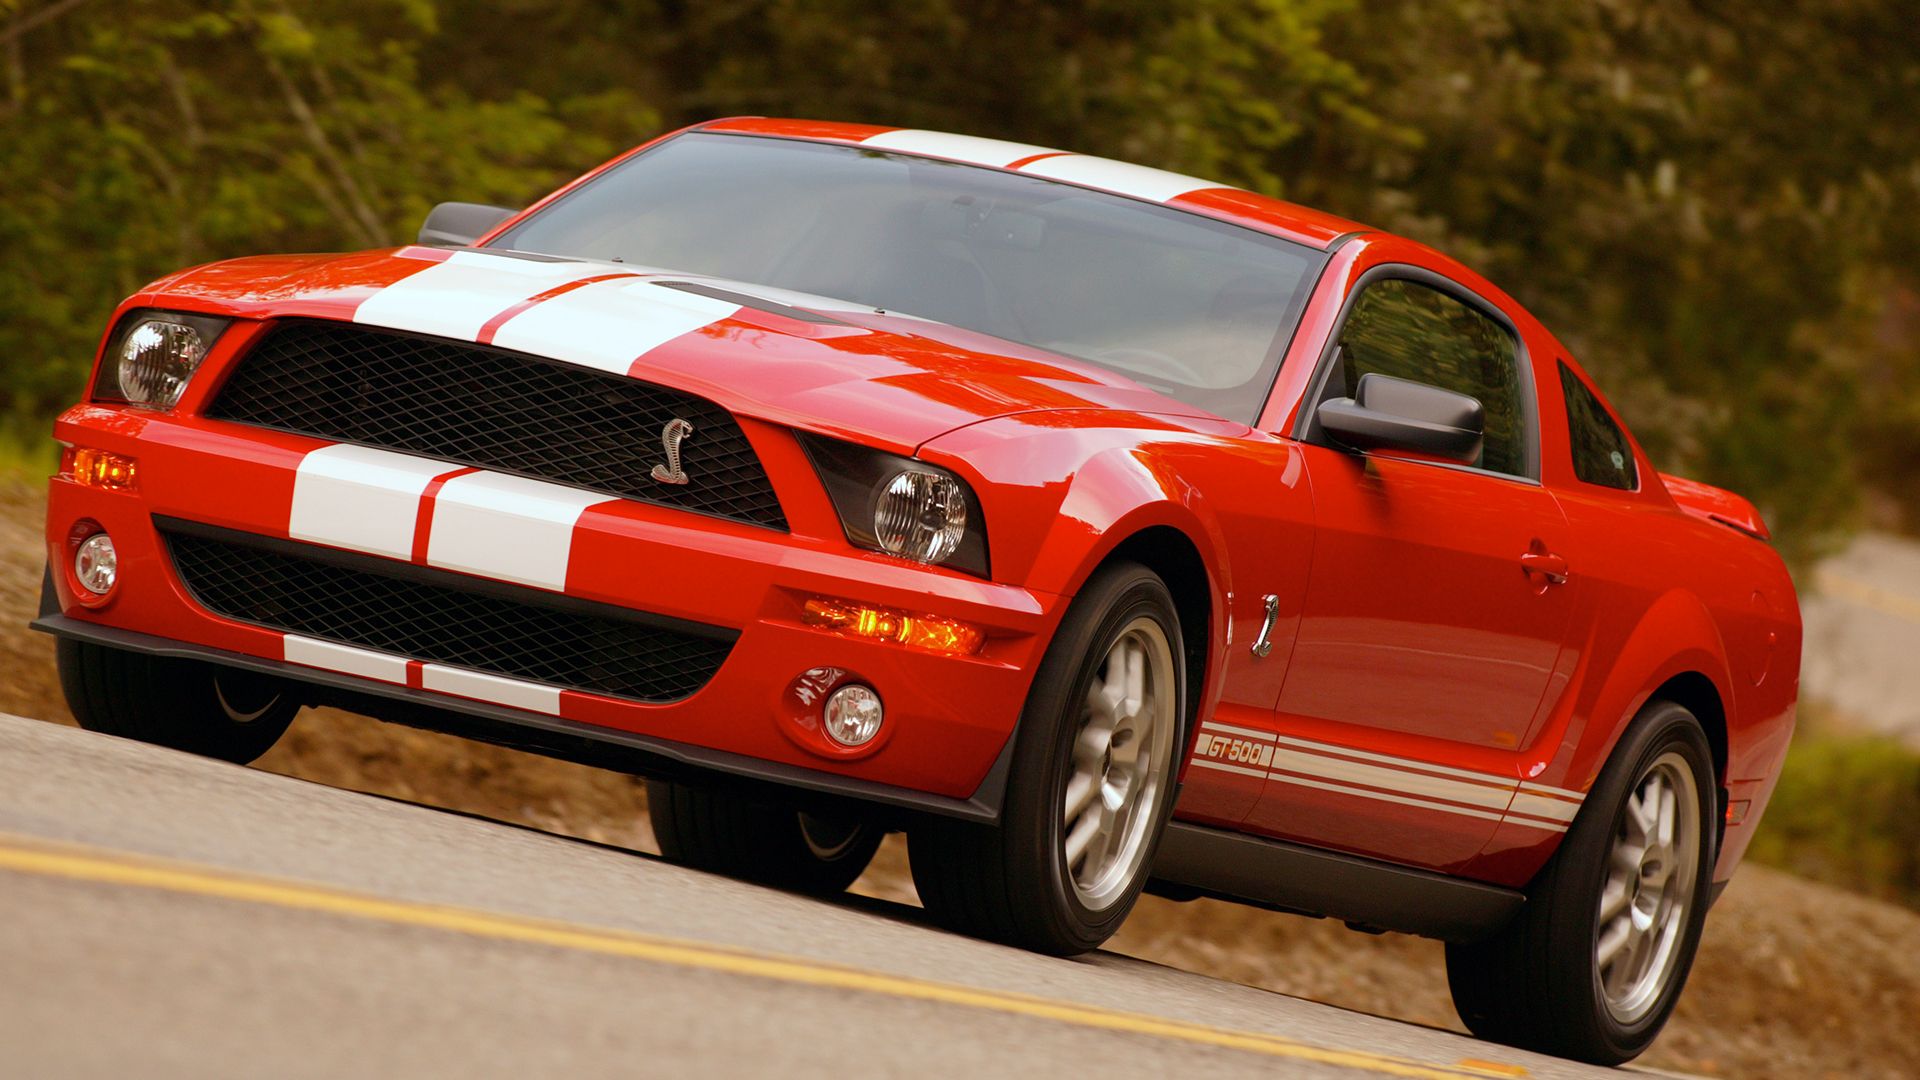 2007 Ford Mustang Shelby GT350 exterior photo